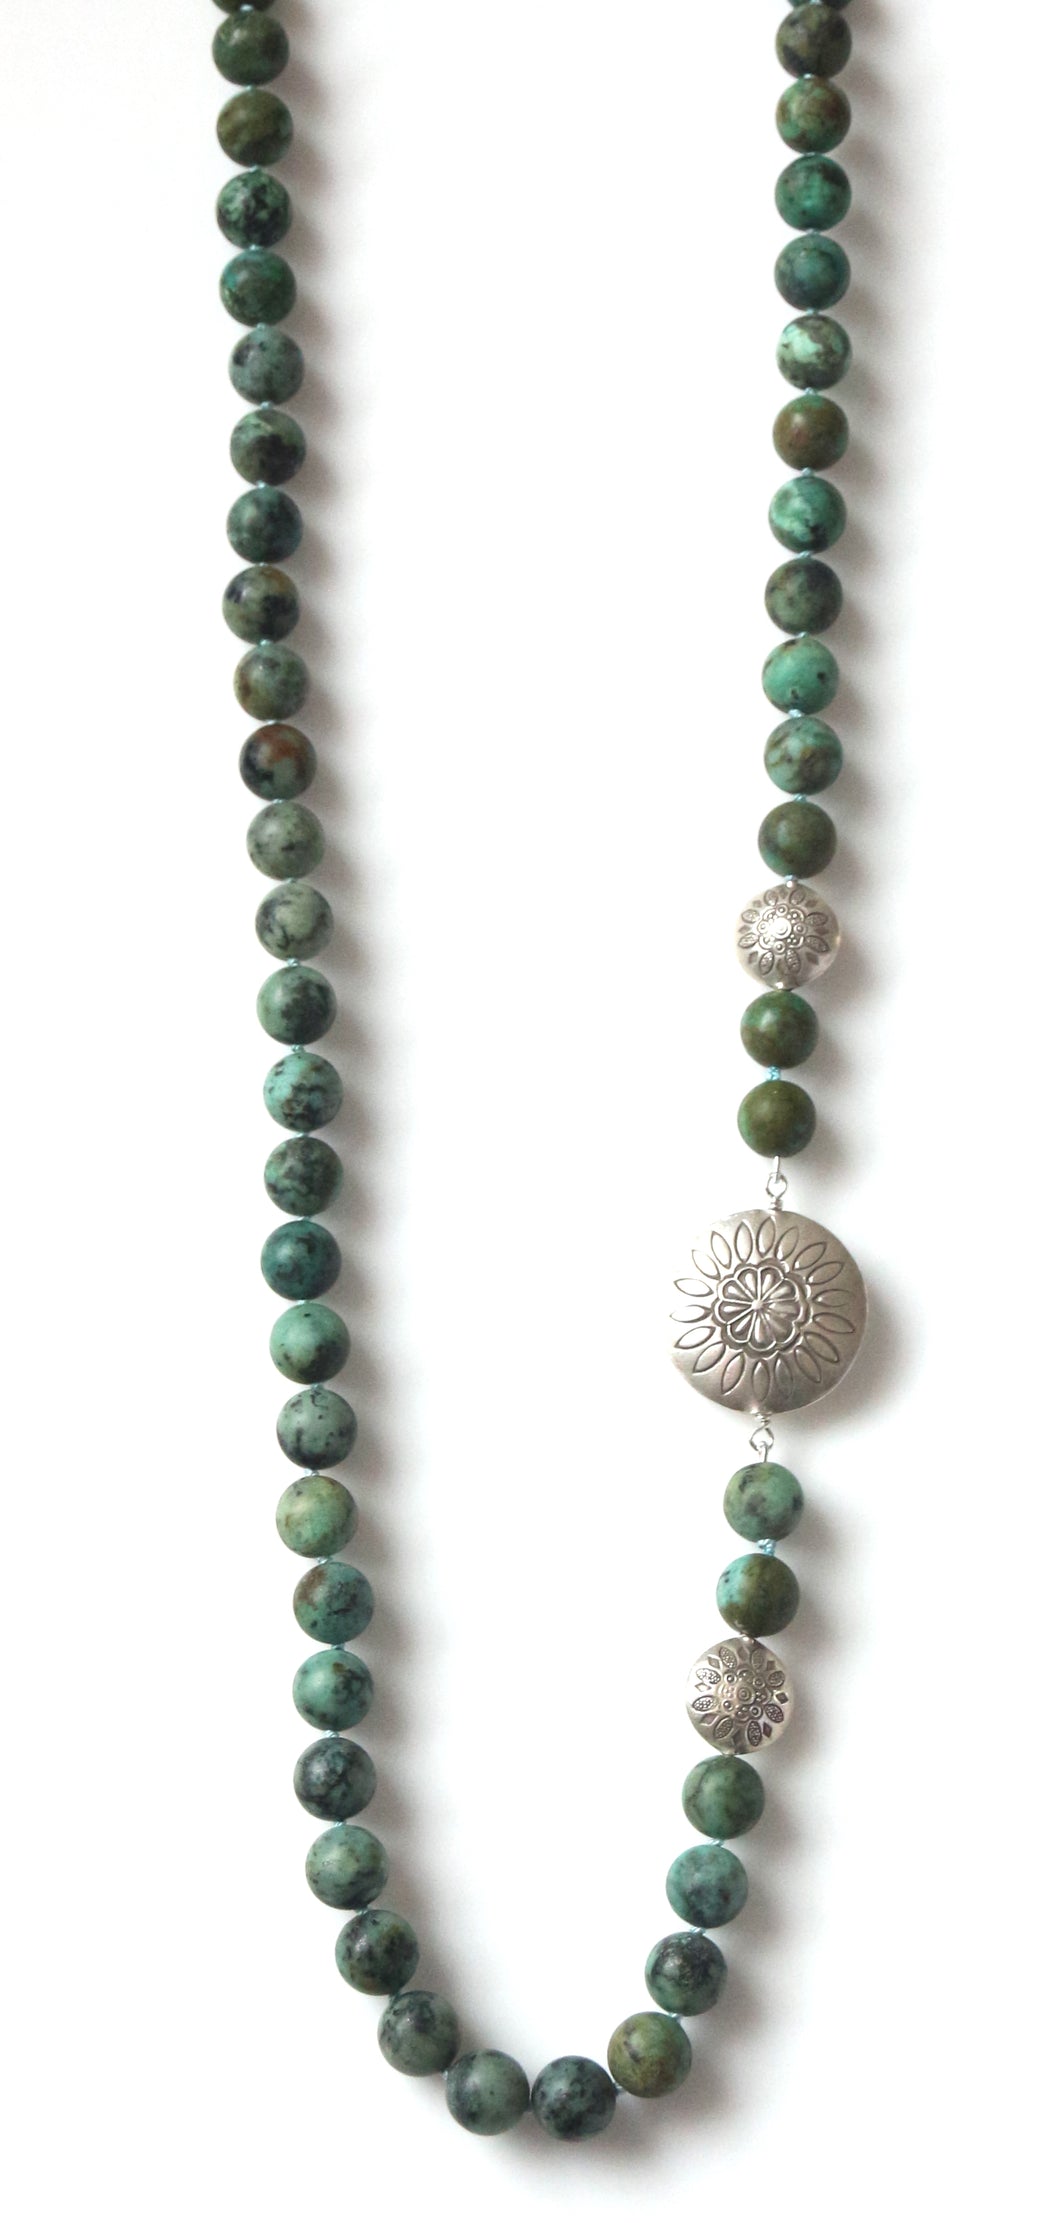 Australian Handmade Necklace with African Turquoise  and Sterling Silver